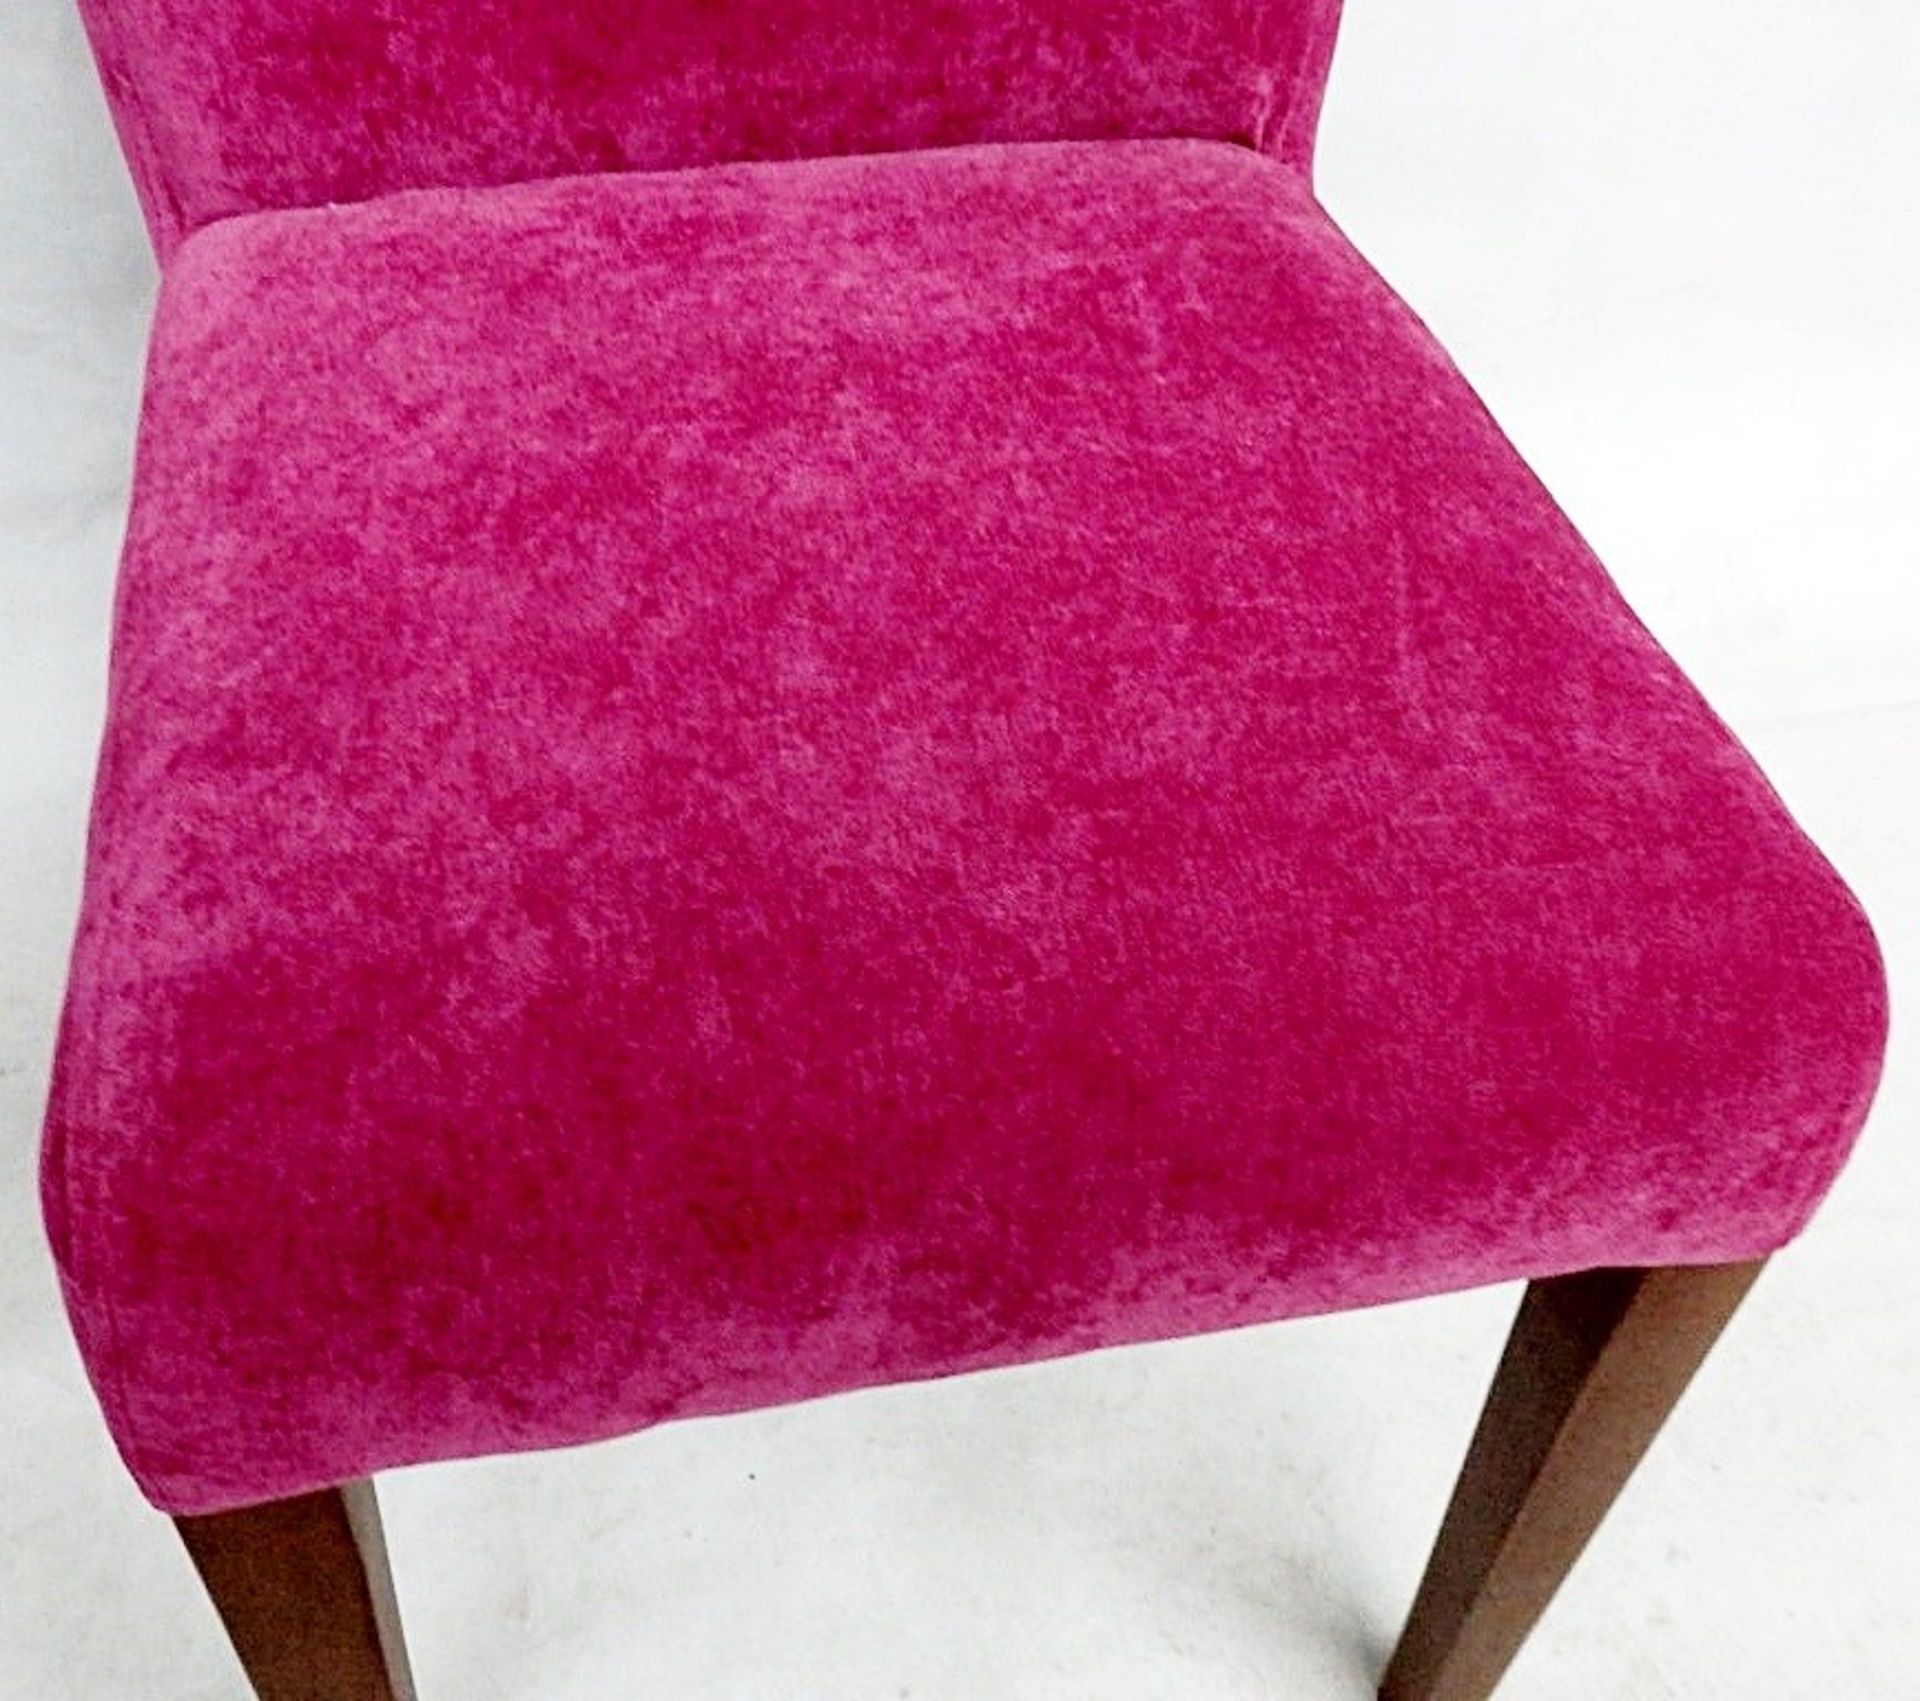 1 x Bespoke Button Back Chair Upholstered In Hot Pink Chenille - Handcrafted & Upholstered By - Image 8 of 8